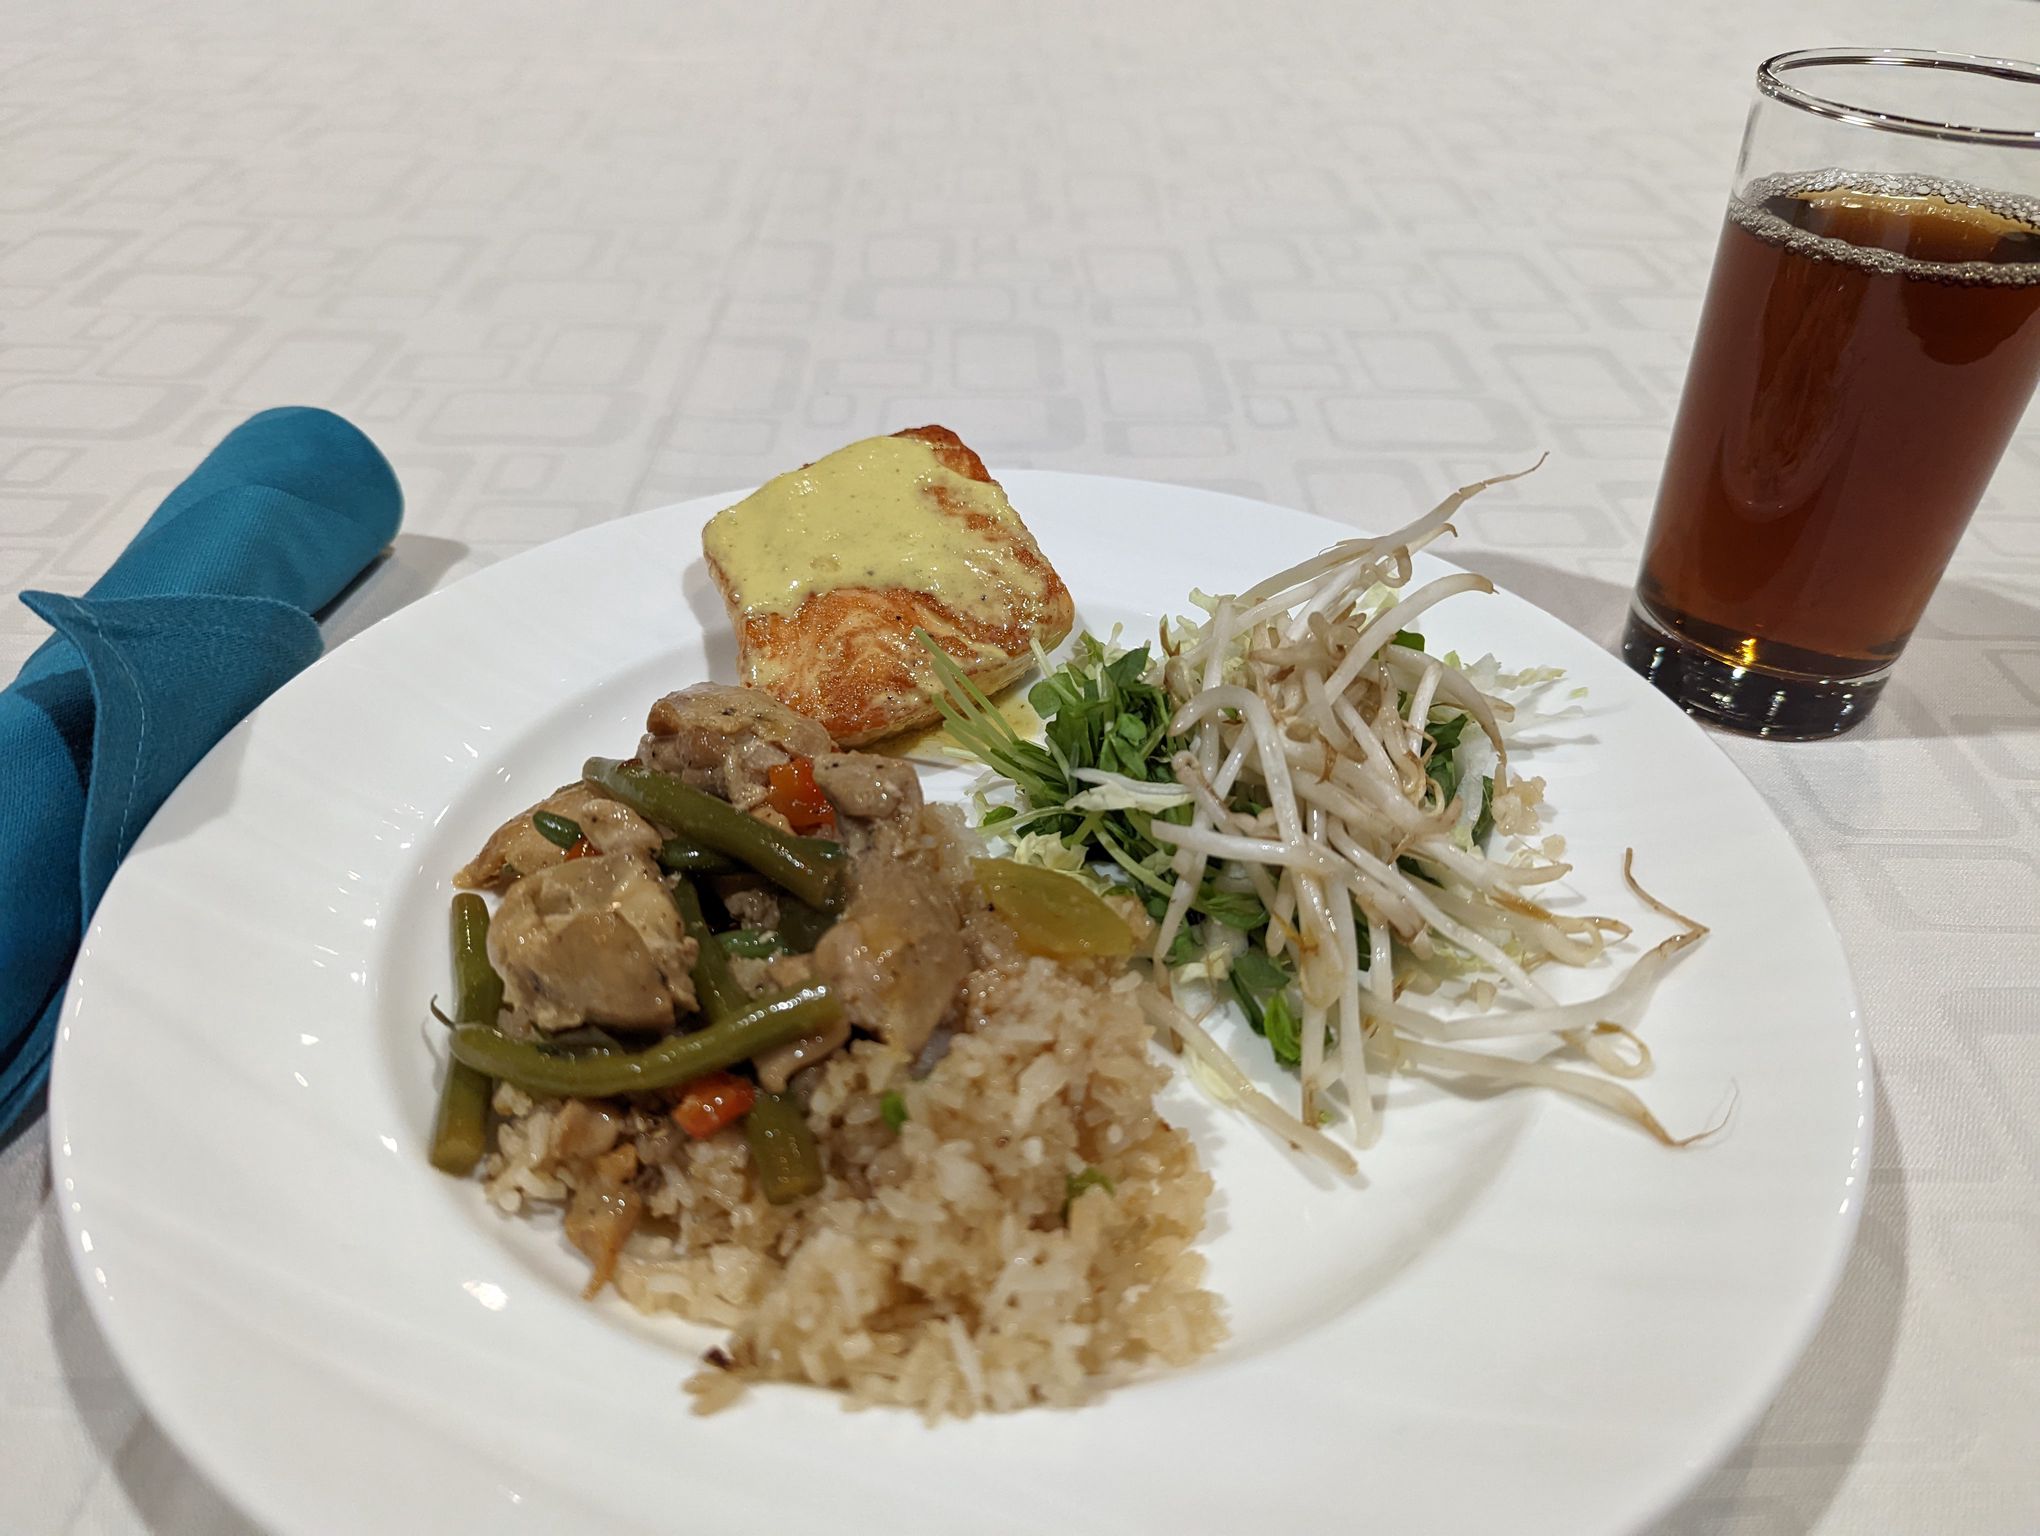 Lunch was pork and rice, some greens, and a salmon steak; plus some slightly flavoured water.